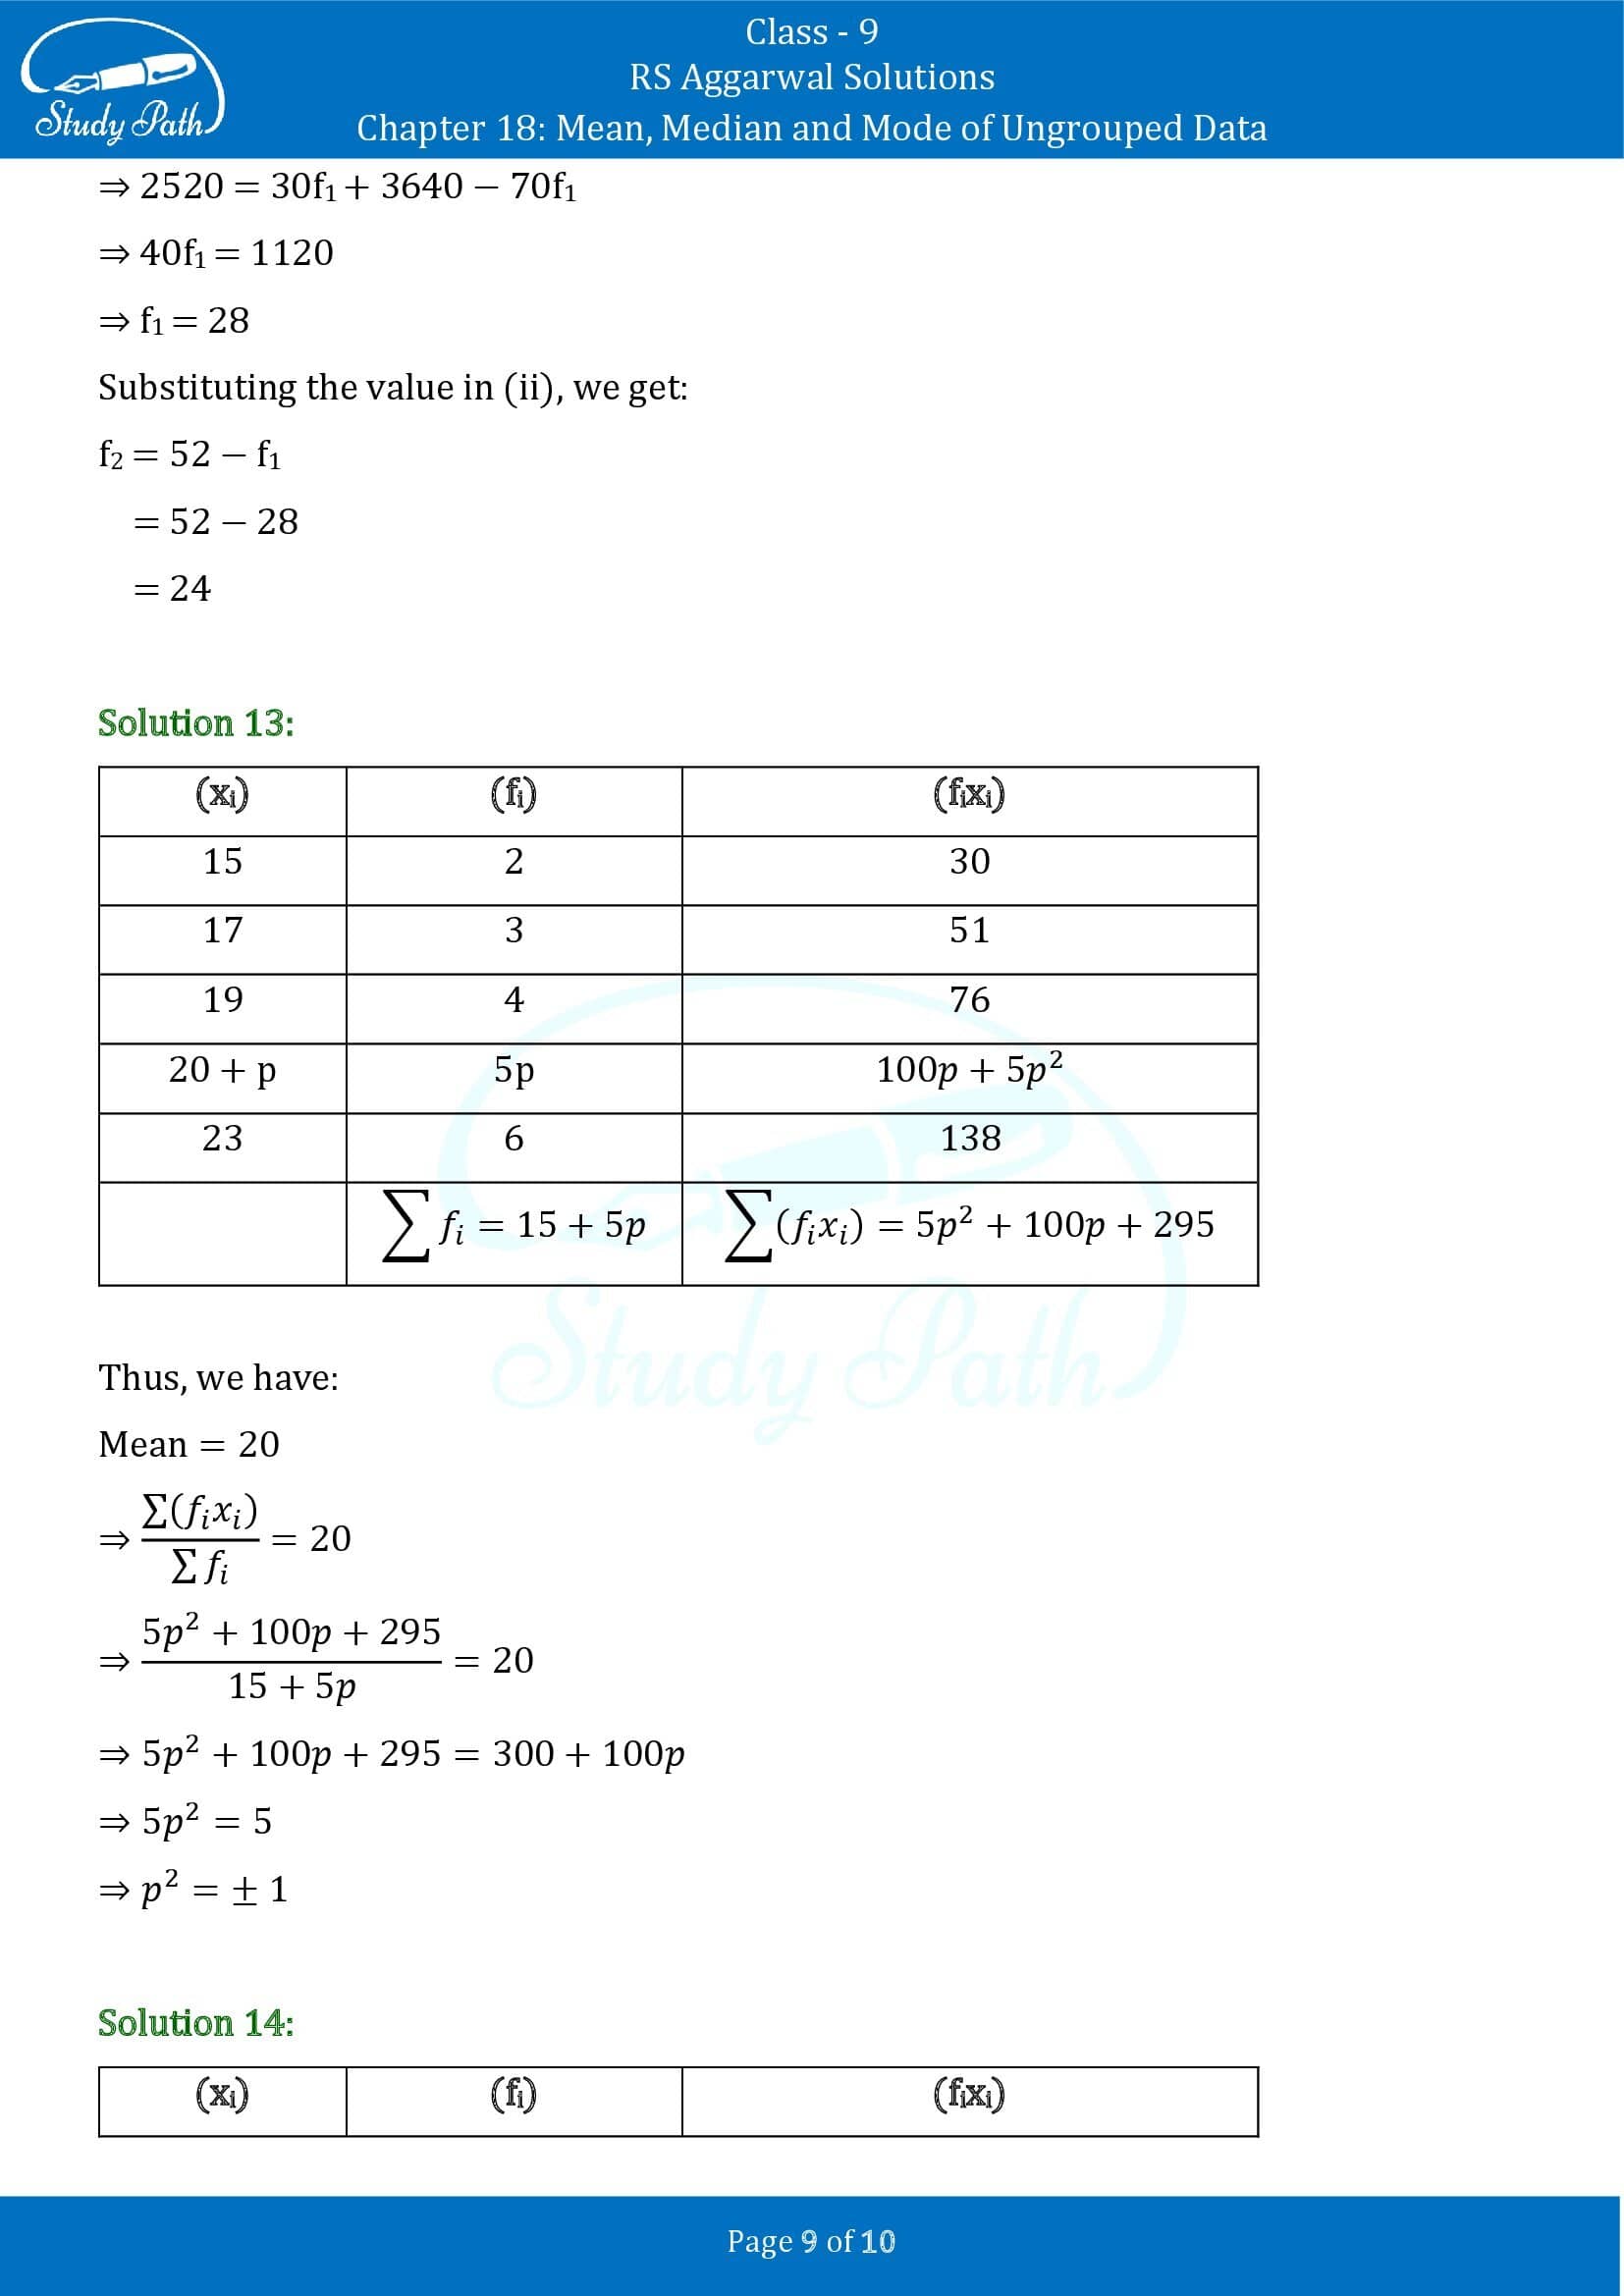 RS Aggarwal Solutions Class 9 Chapter 18 Mean Median and Mode of Ungrouped Data Exercise 18B 00009